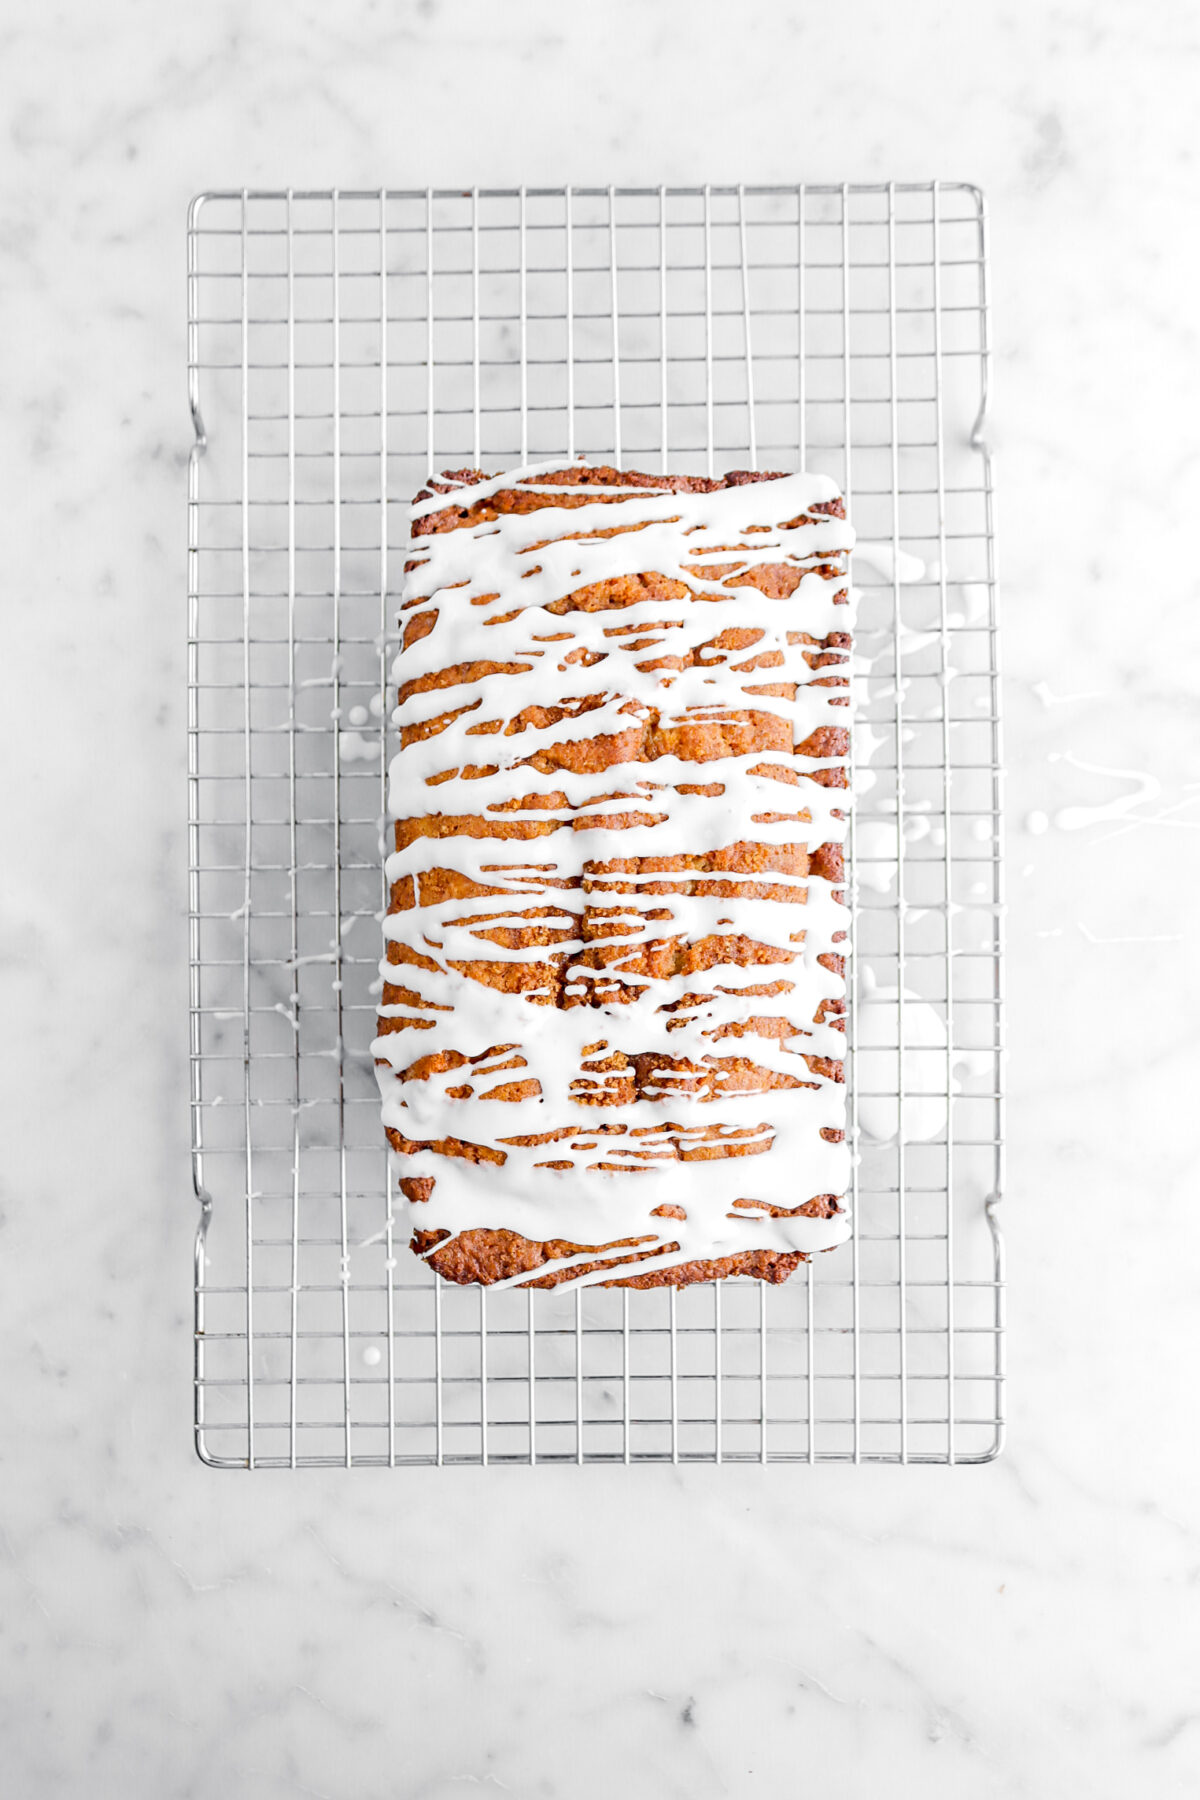 cinnamon swirl bread with icing drizzled over the top.